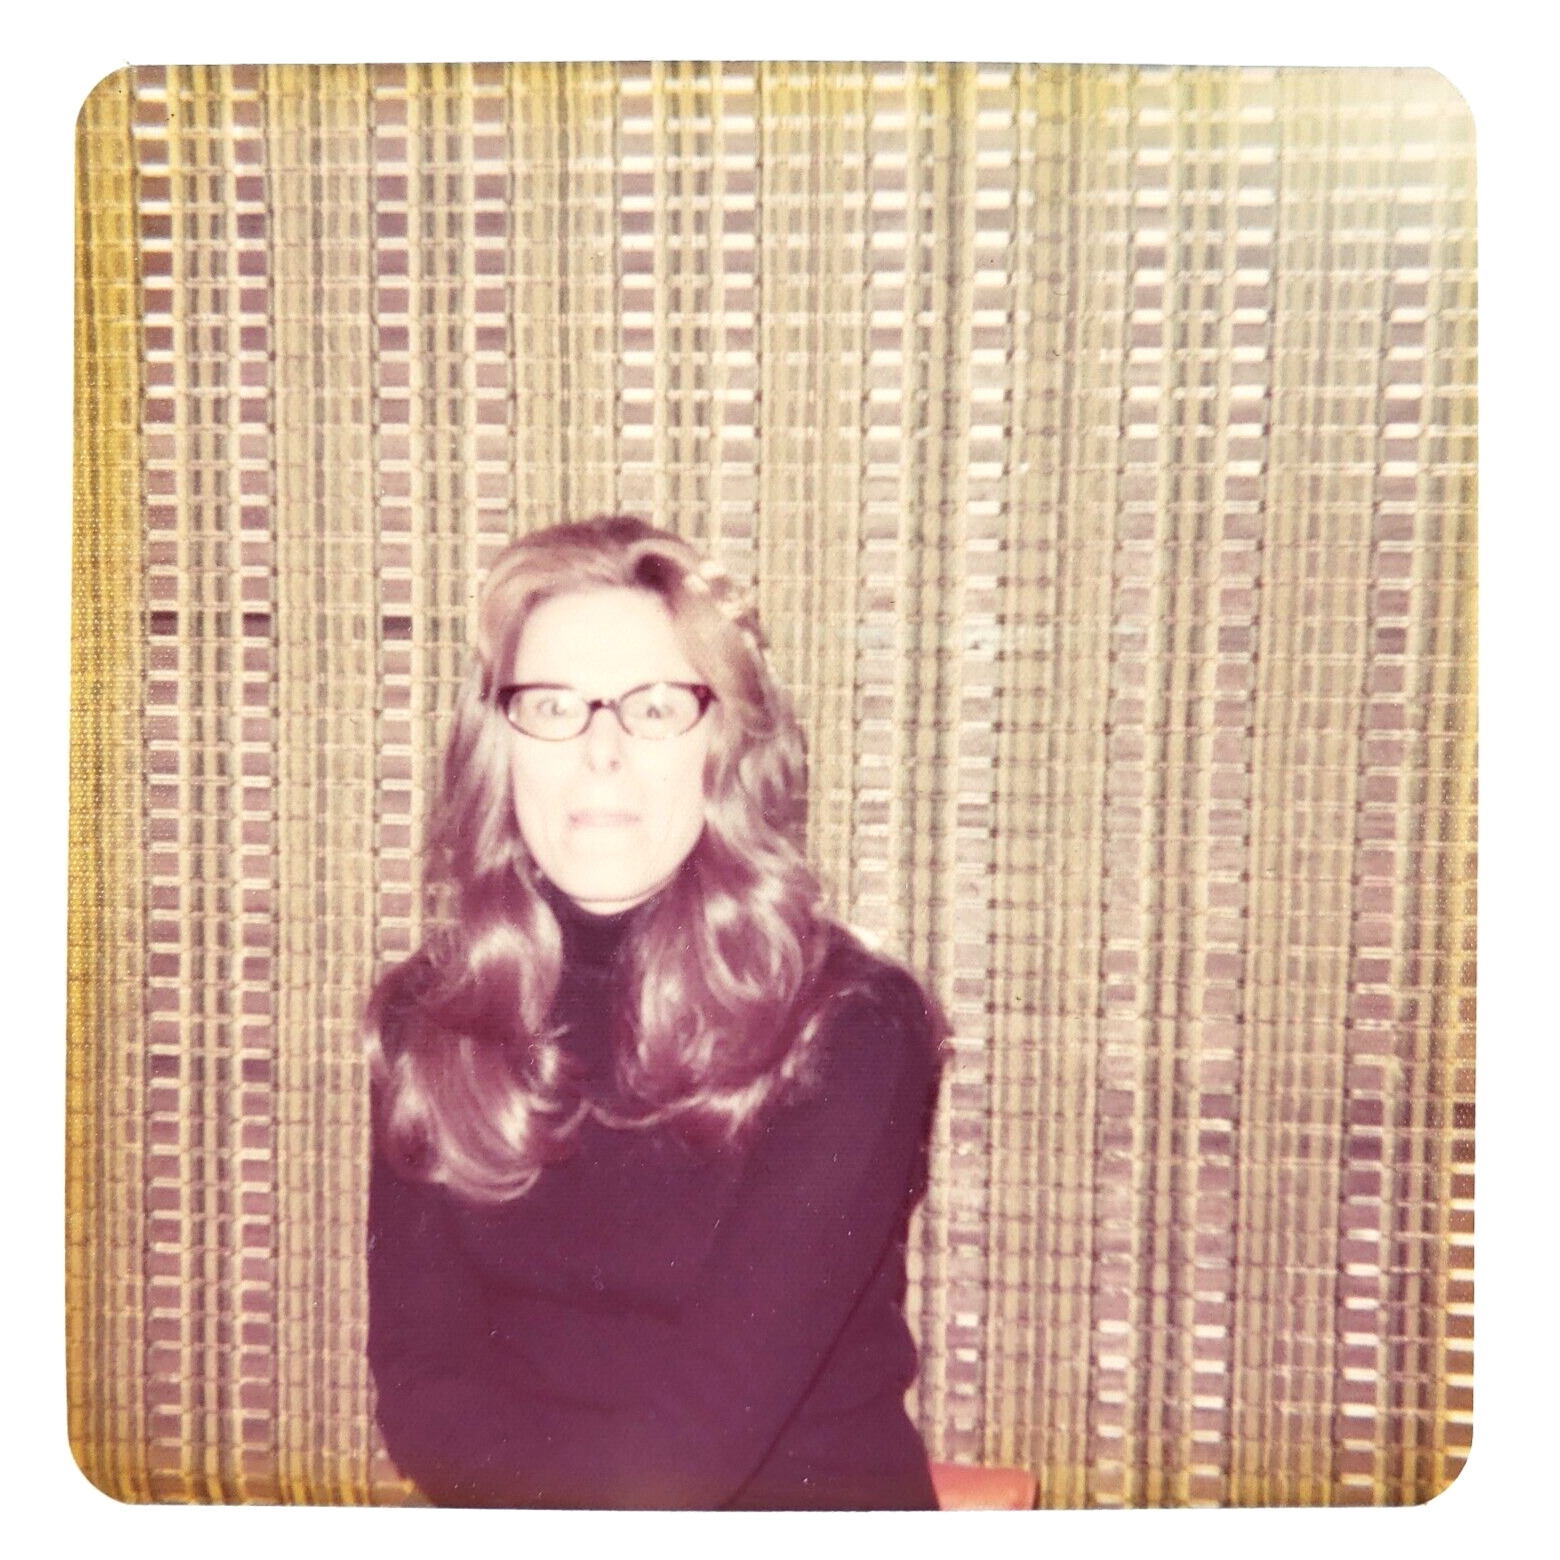 Turtleneck Woman Against Thatch Photo 1970s Long-Haired Lady Snapshot B3500